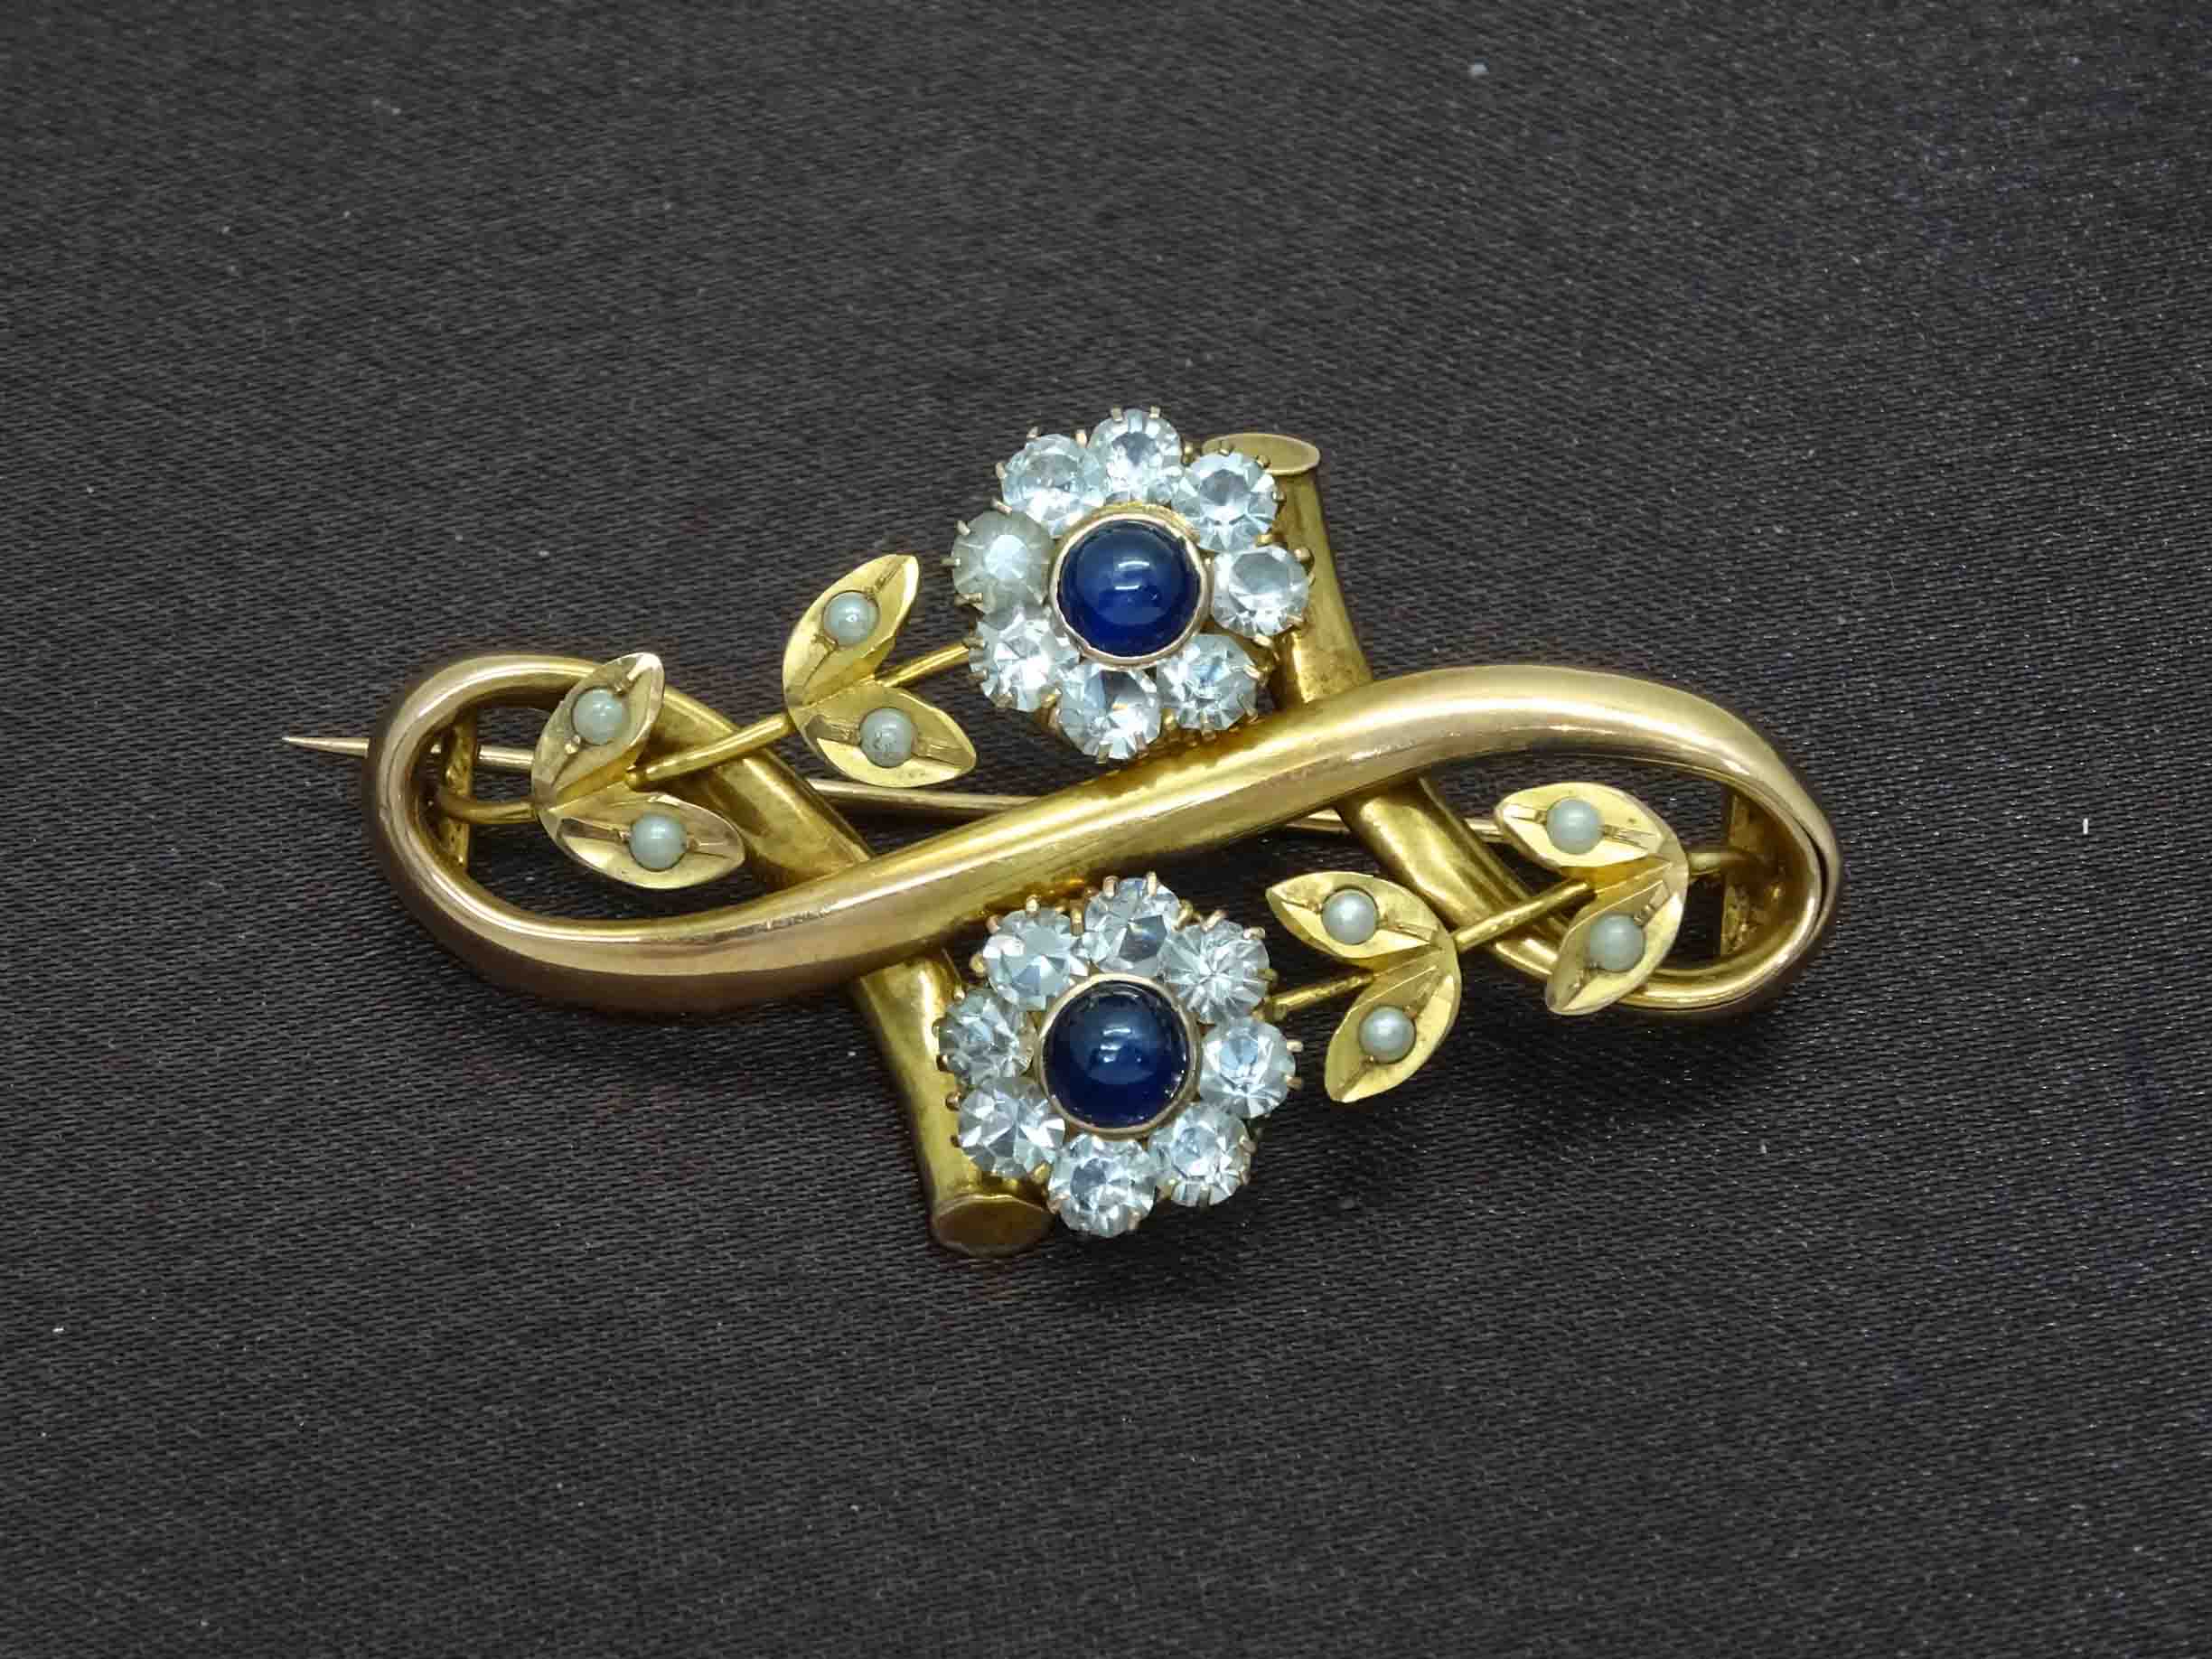 Pin on Gold Jewelry